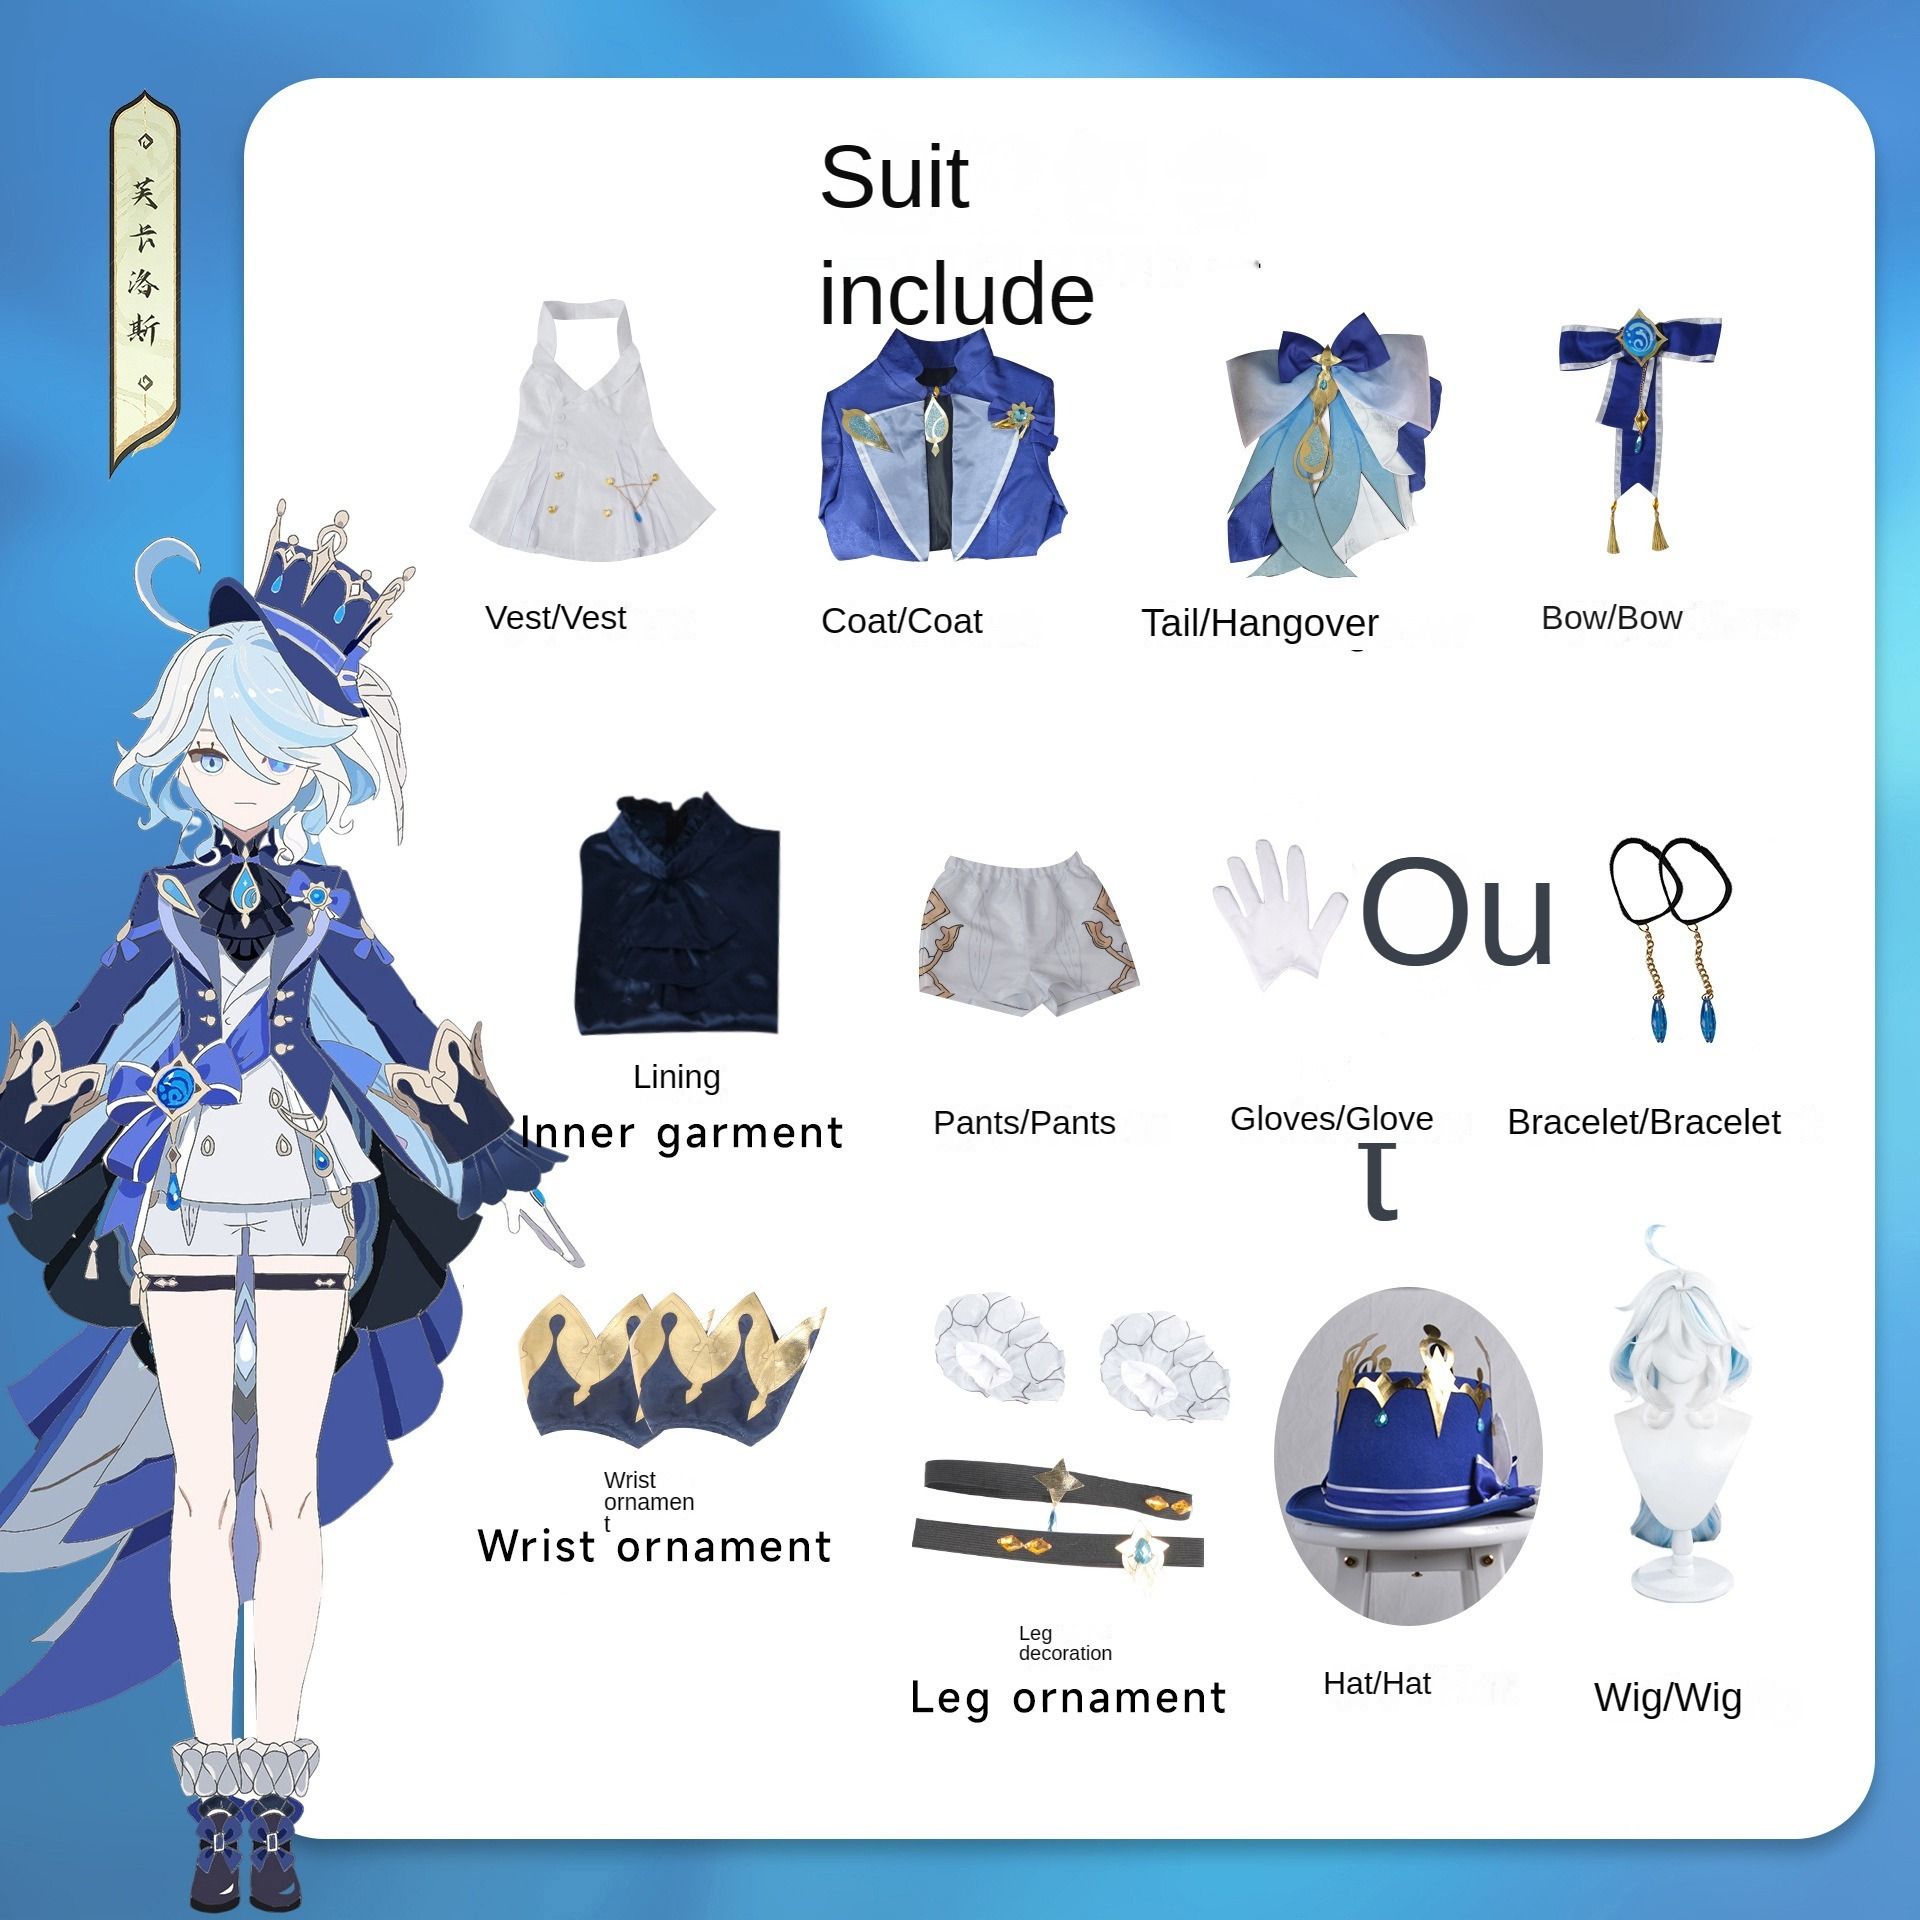 Costume + Accessories (including top hat